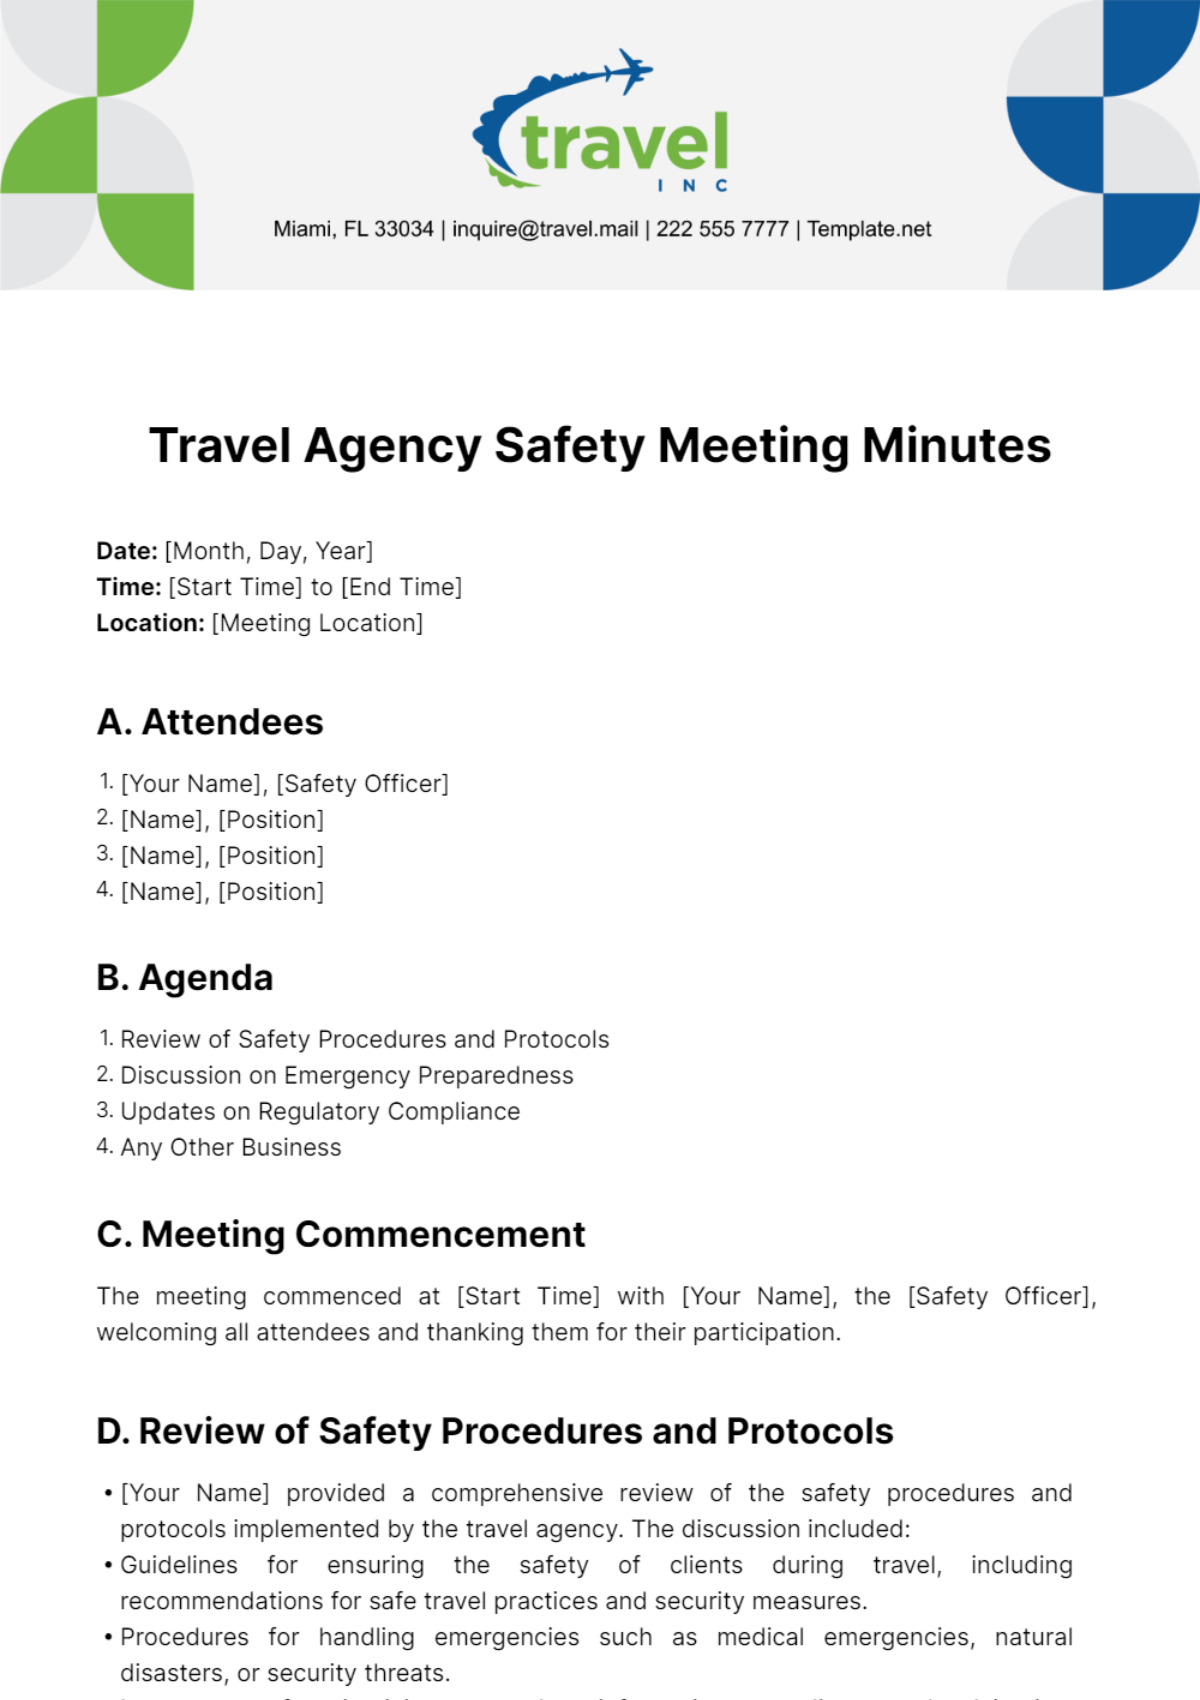 Free Travel Agency Safety Meeting Minutes Template